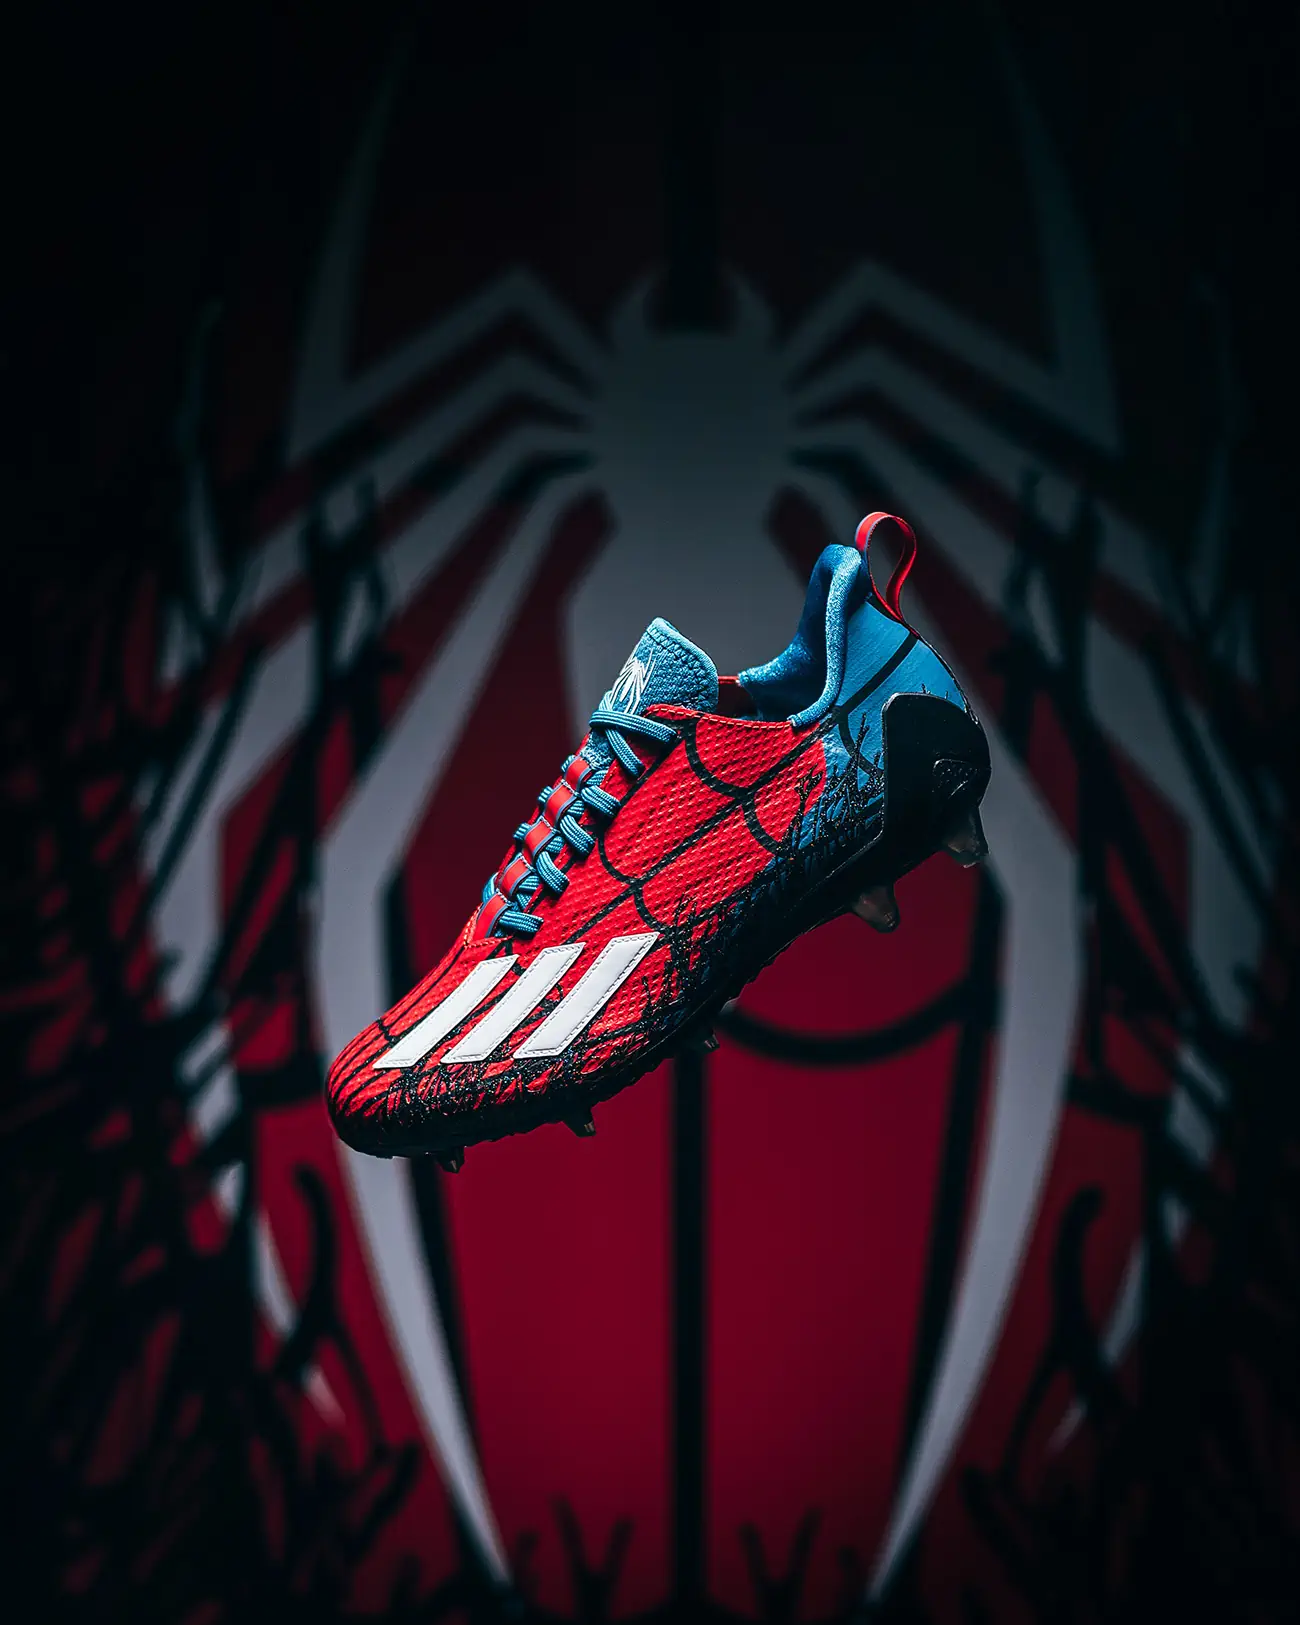 Stepping into Spider-Man's shoes with adidas' new collection